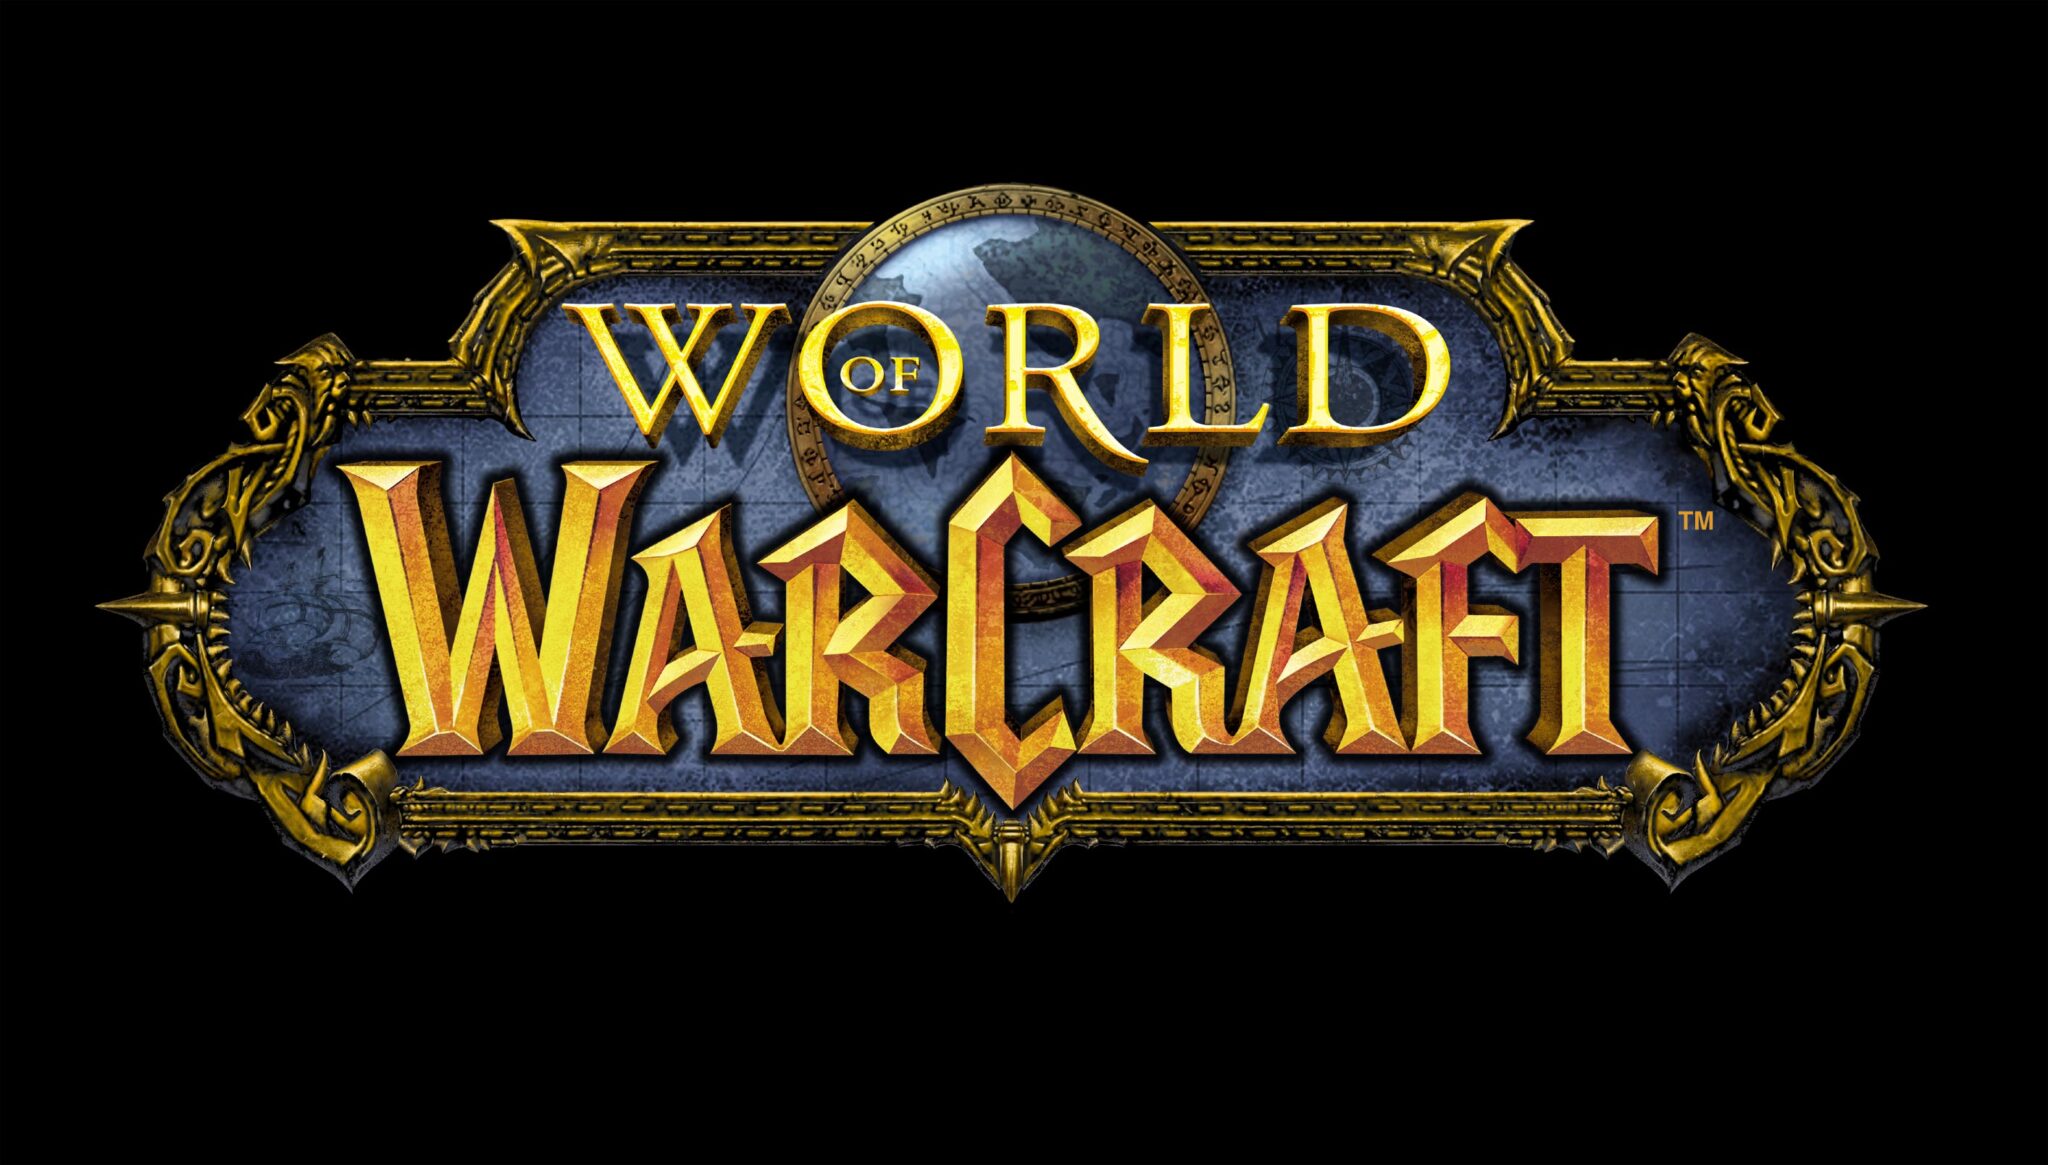 Comic-Con 2013: ‘World of Warcraft’ Teaser Trailer Debuts